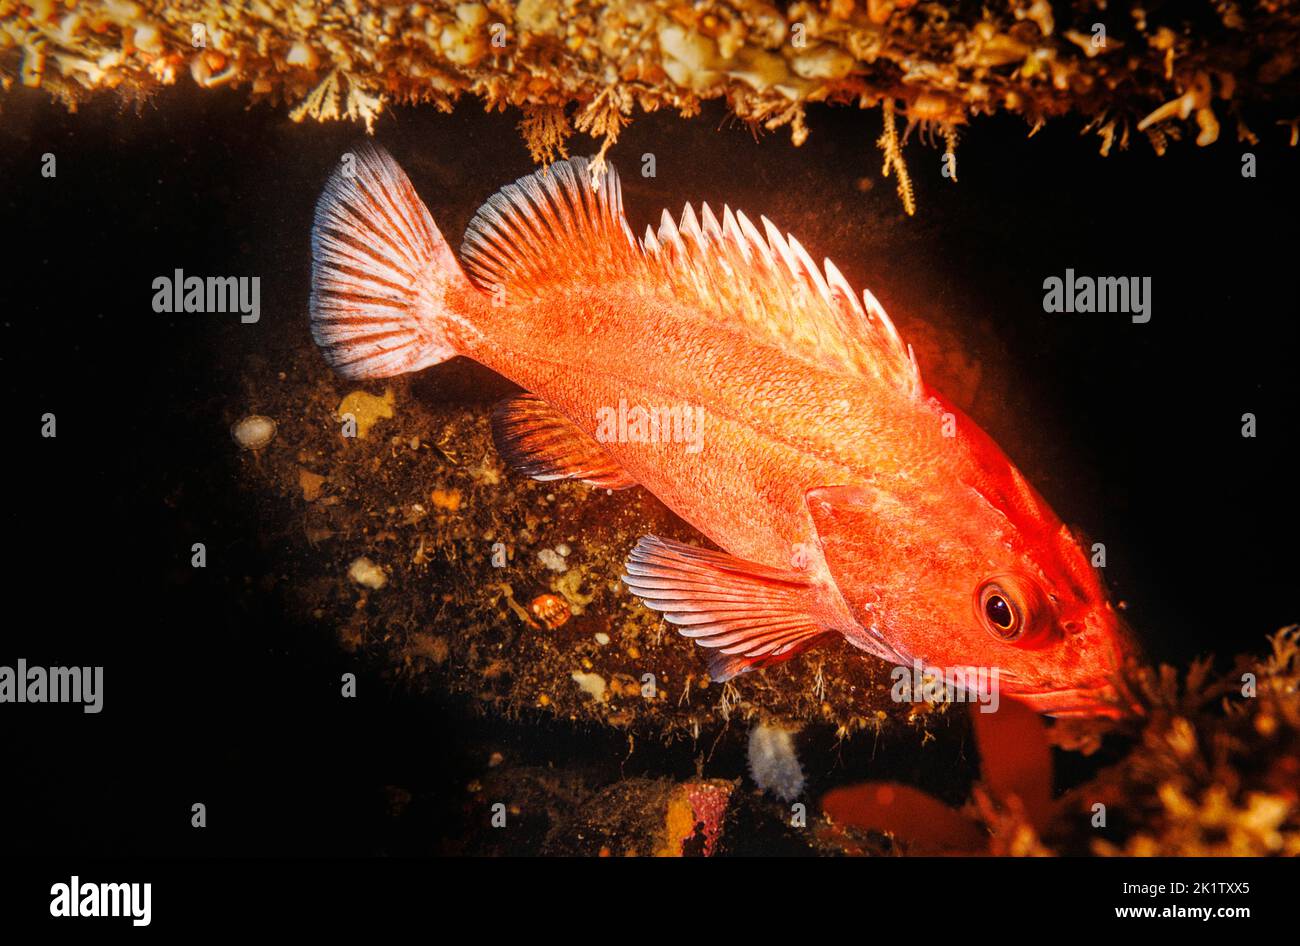 The yelloweye rockfish, Sebastes ruberrimus, can reach 3 feet in length and 25 lbs. British Columbia, Canada. It is also known as the rasphead rockfis Stock Photo